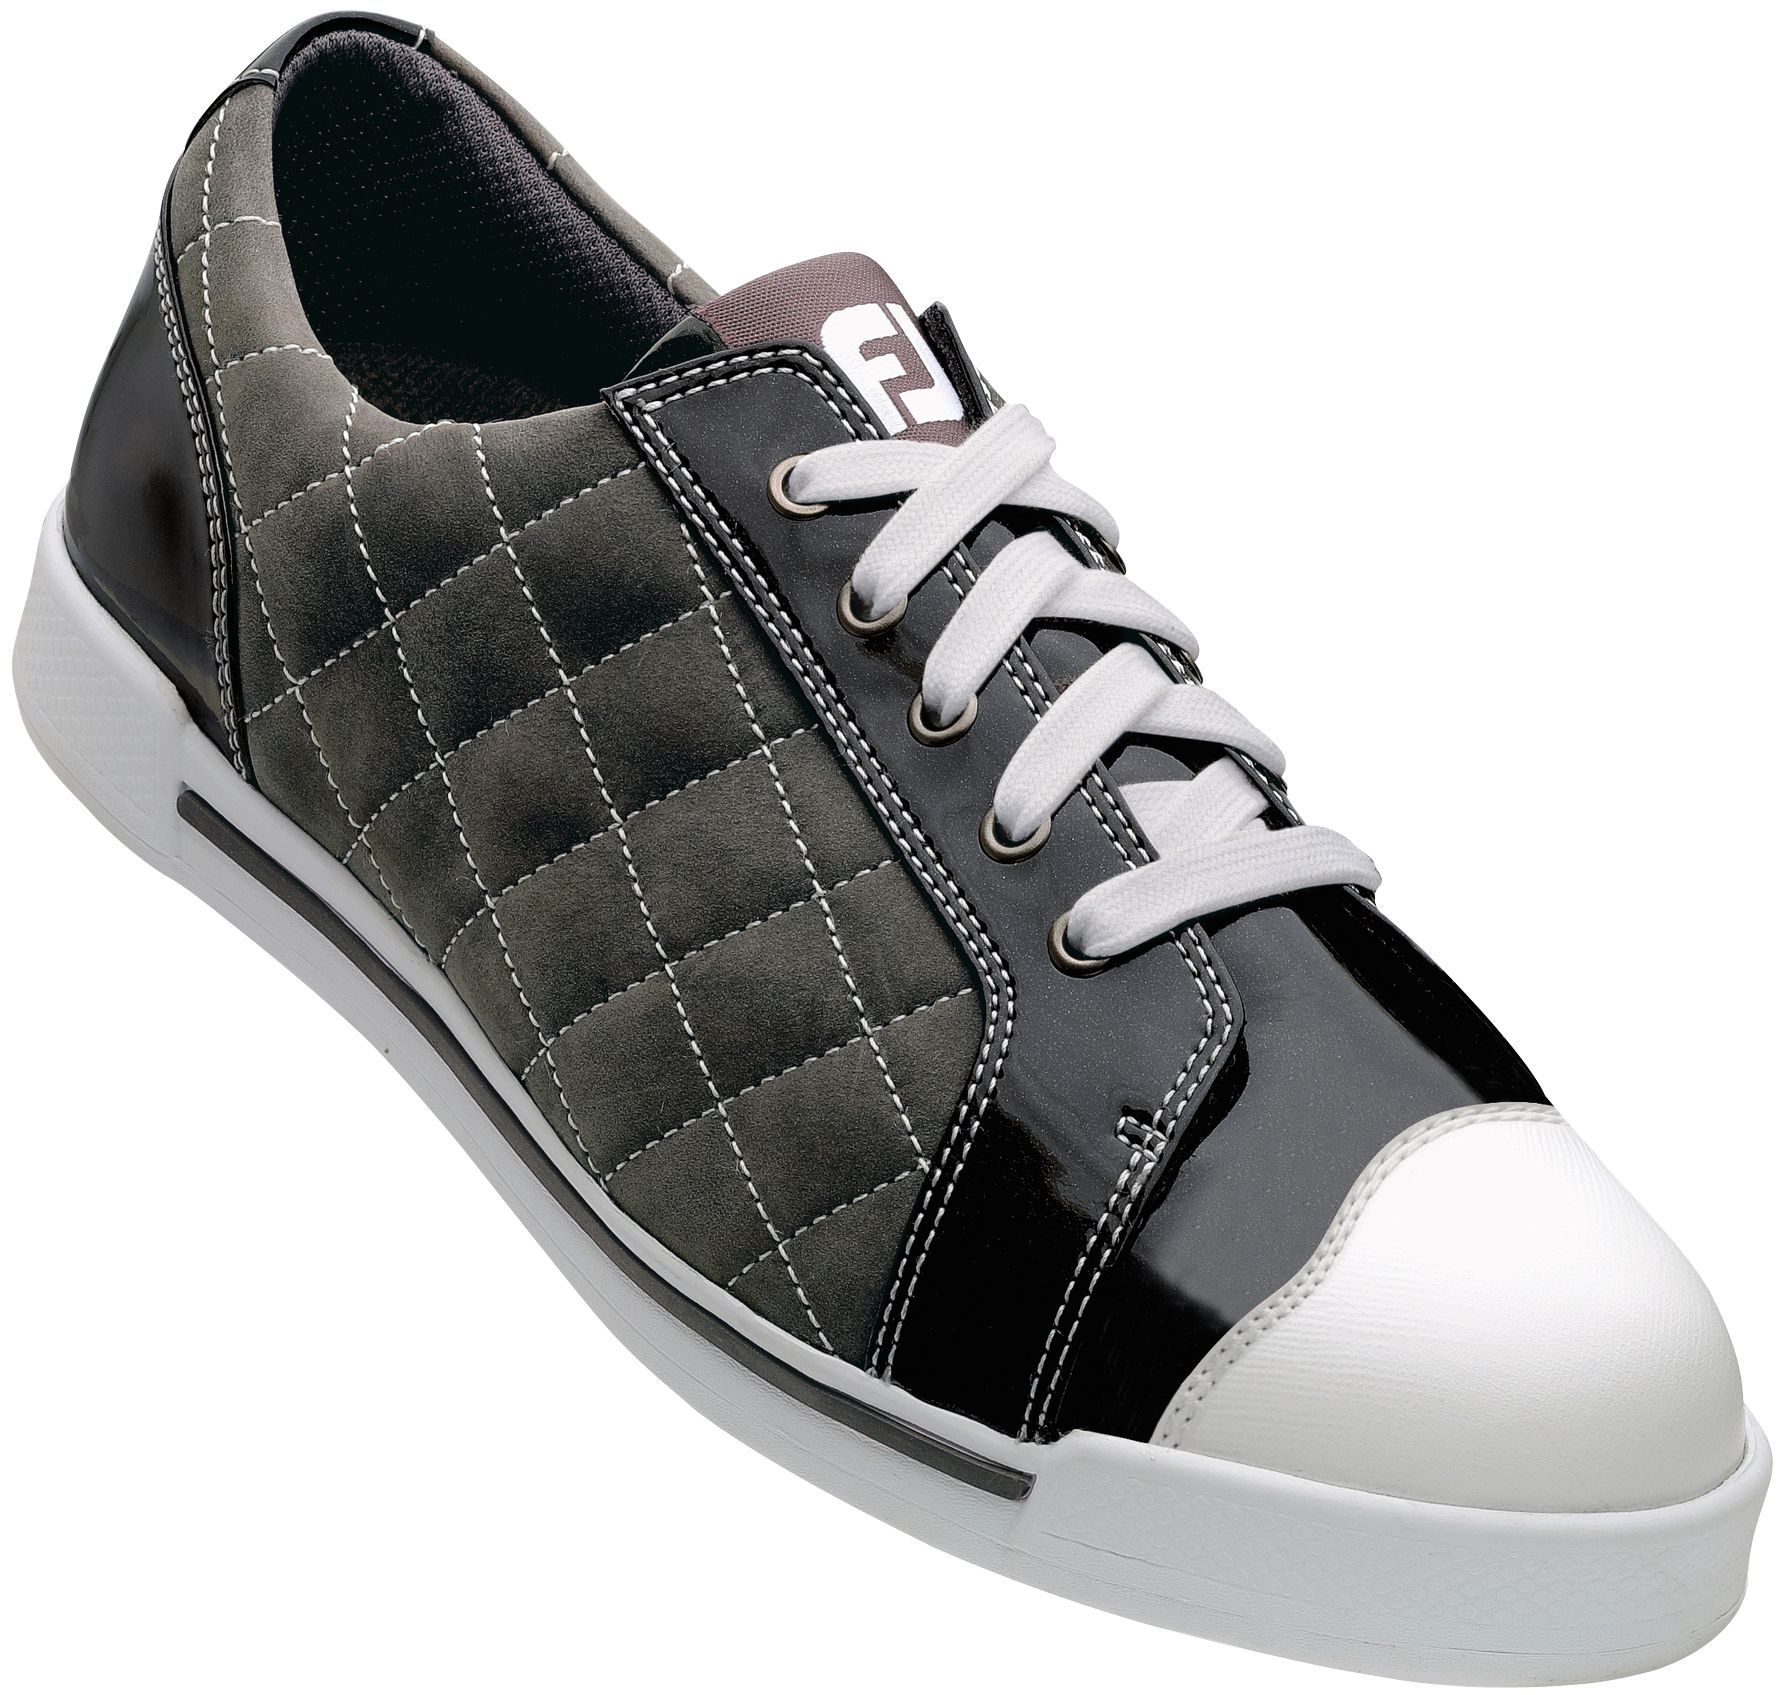 Footjoy Womens Golf Shoes on Footjoy Women S Summer Series Golf Shoes   Charcoal White